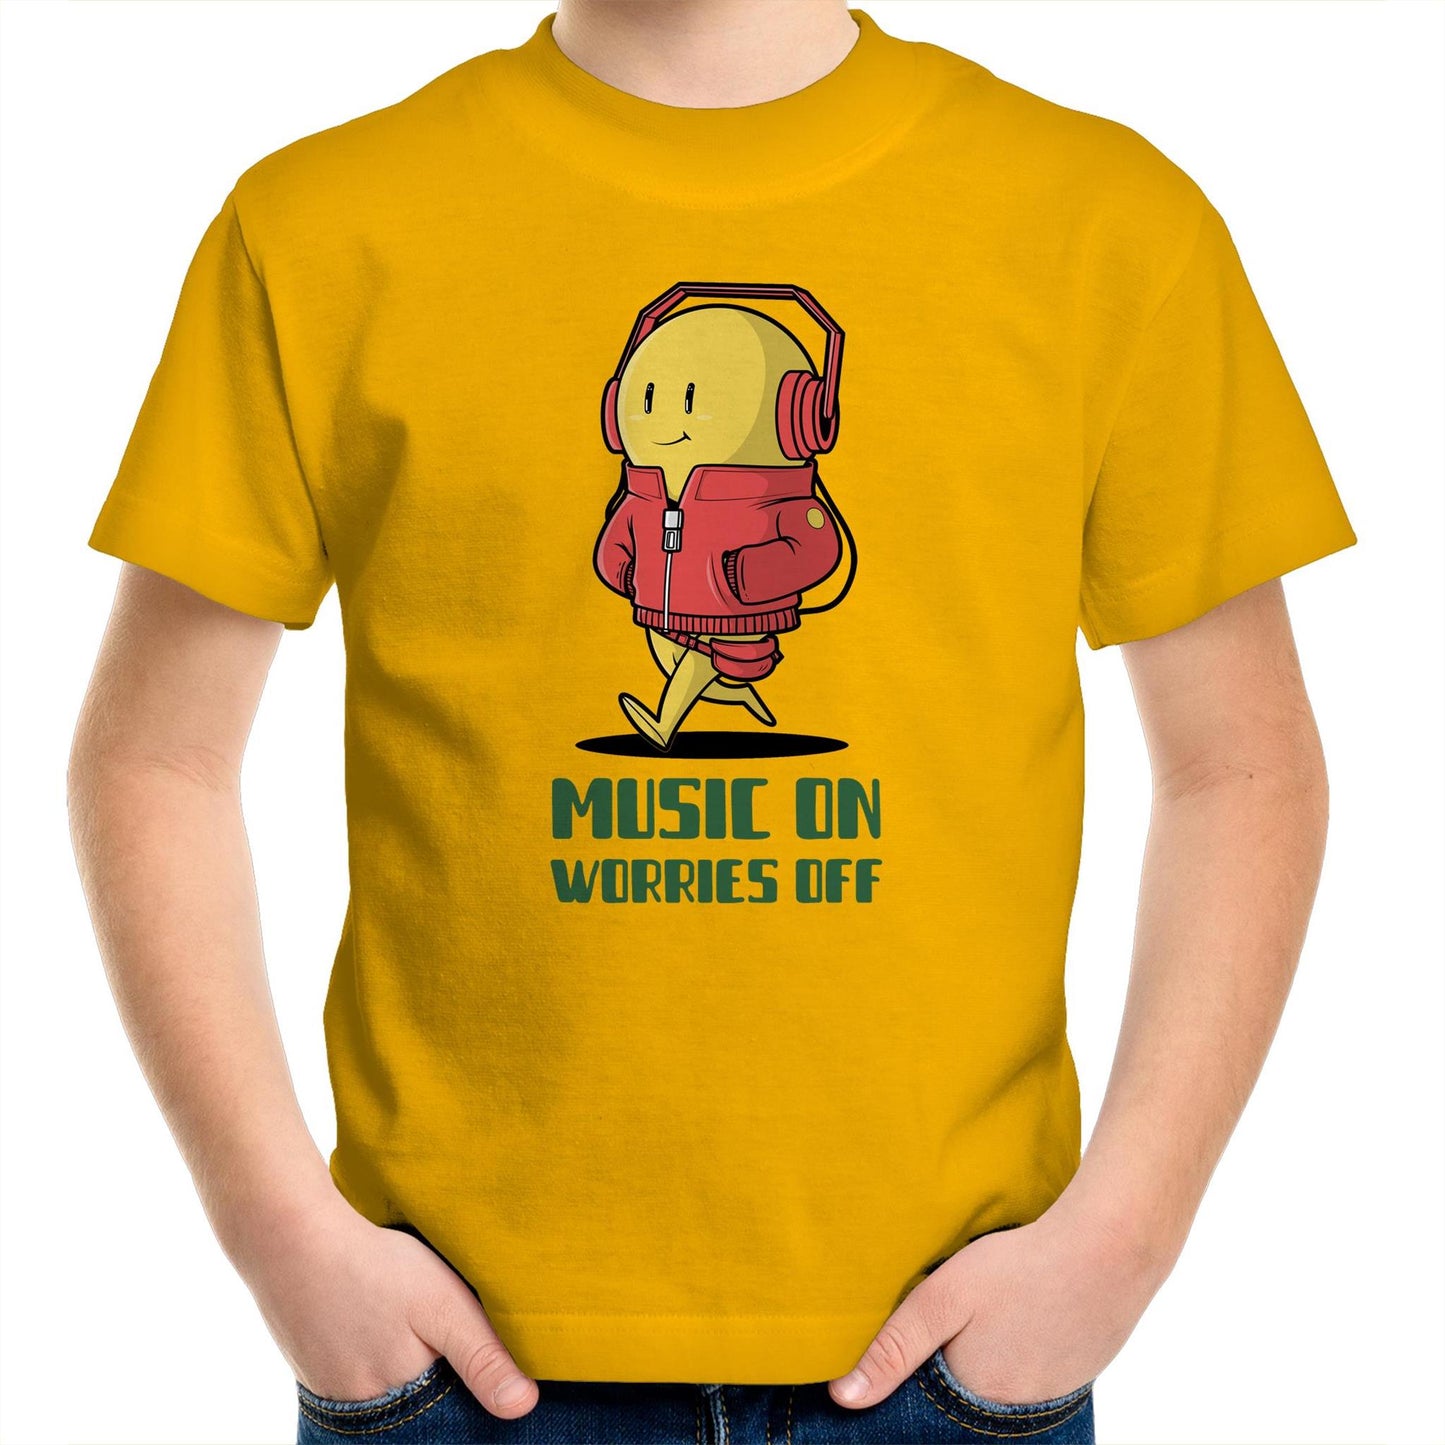 Music On, Worries Off - Kids Youth T-Shirt Gold Kids Youth T-shirt Music